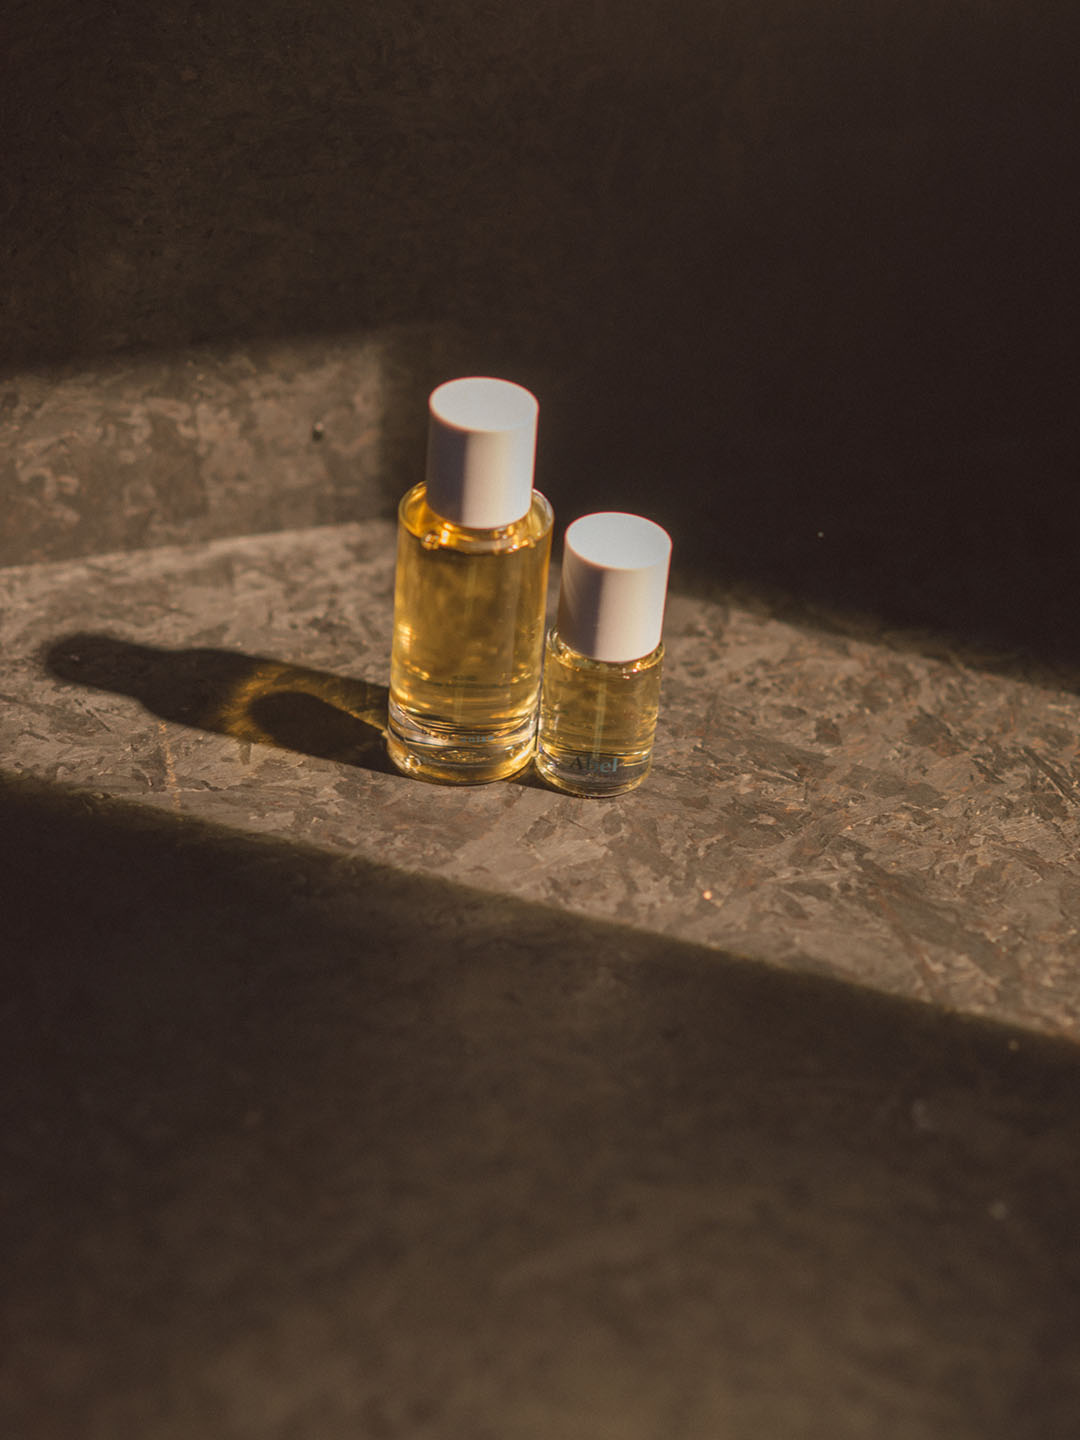 Two vibrant bottles of Abel essential oil, one infused with the smoky amber Black Anise and the other with dynamic star anise, sitting on a table.